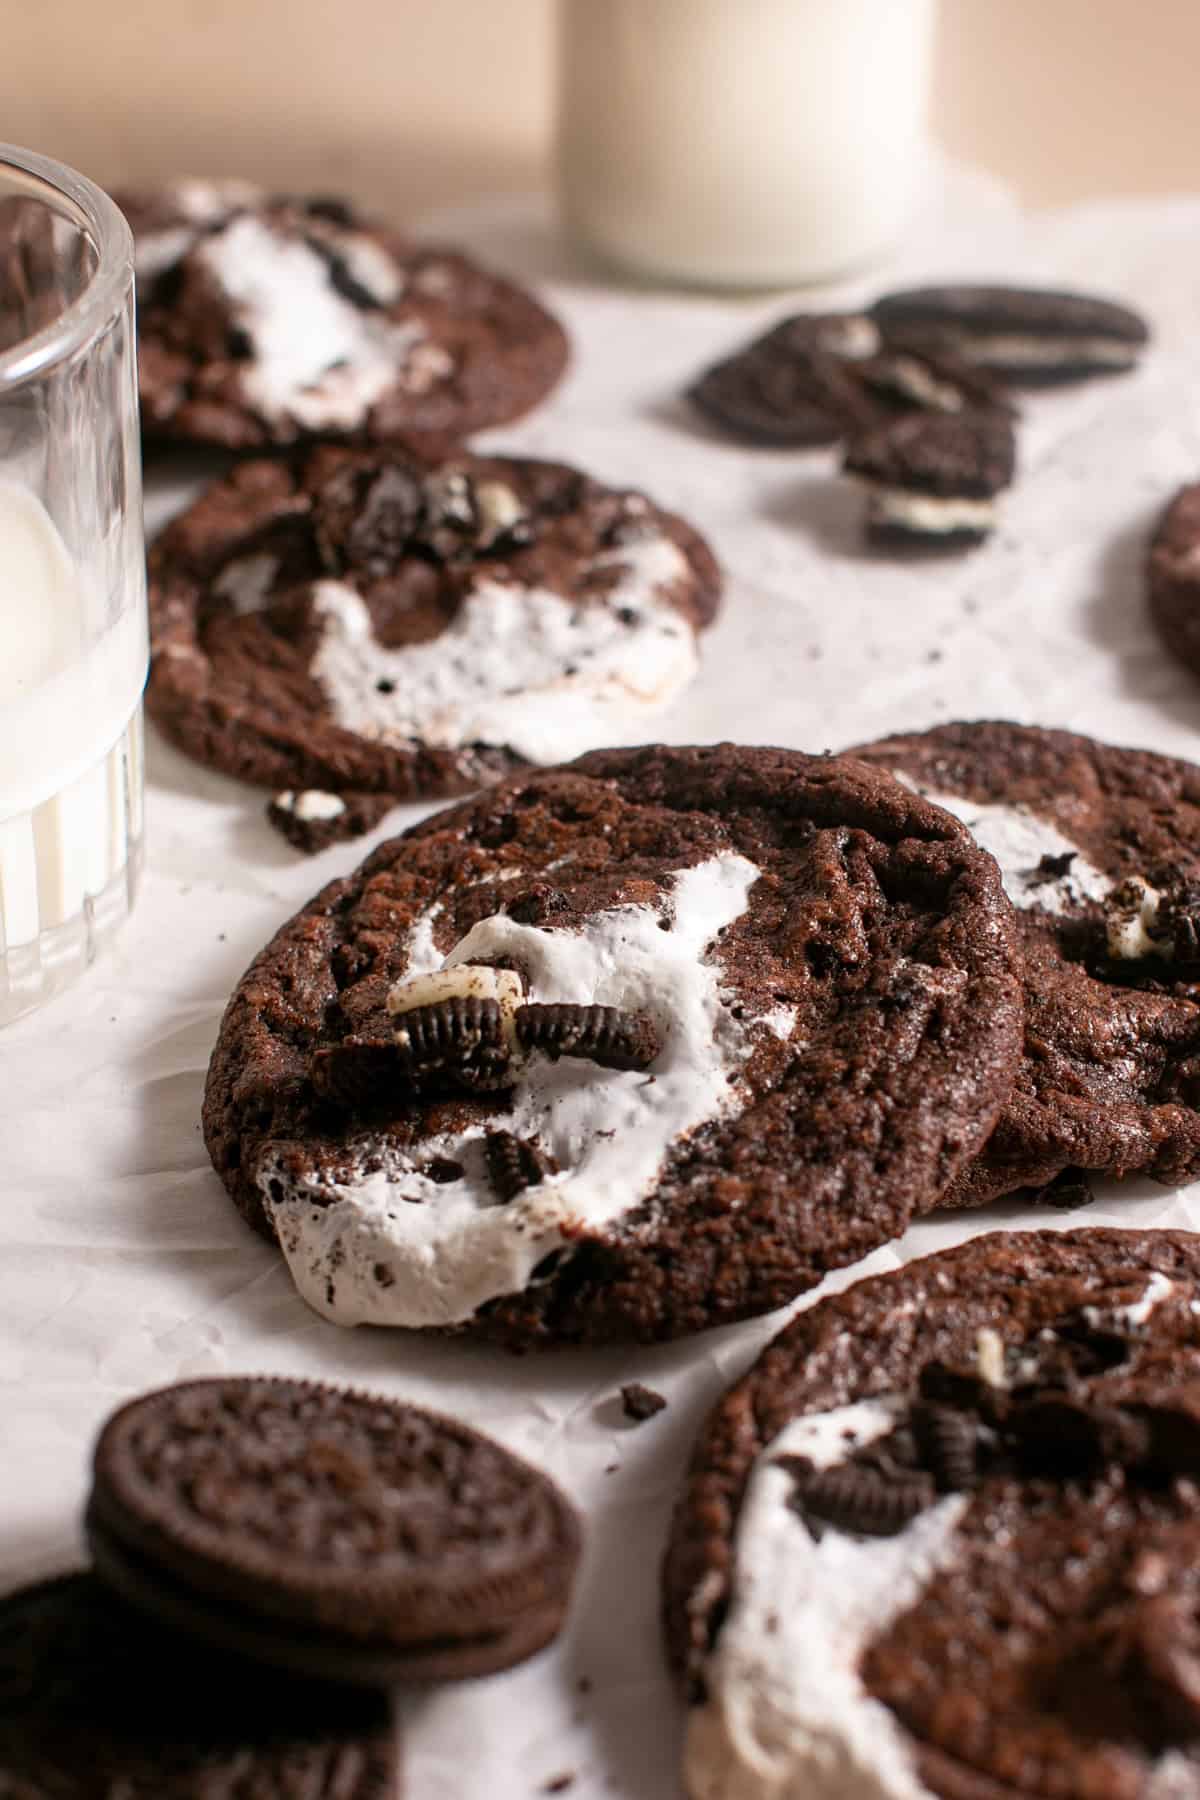 Minty Chocolate Marshmallow Cookies by a glass of milk.